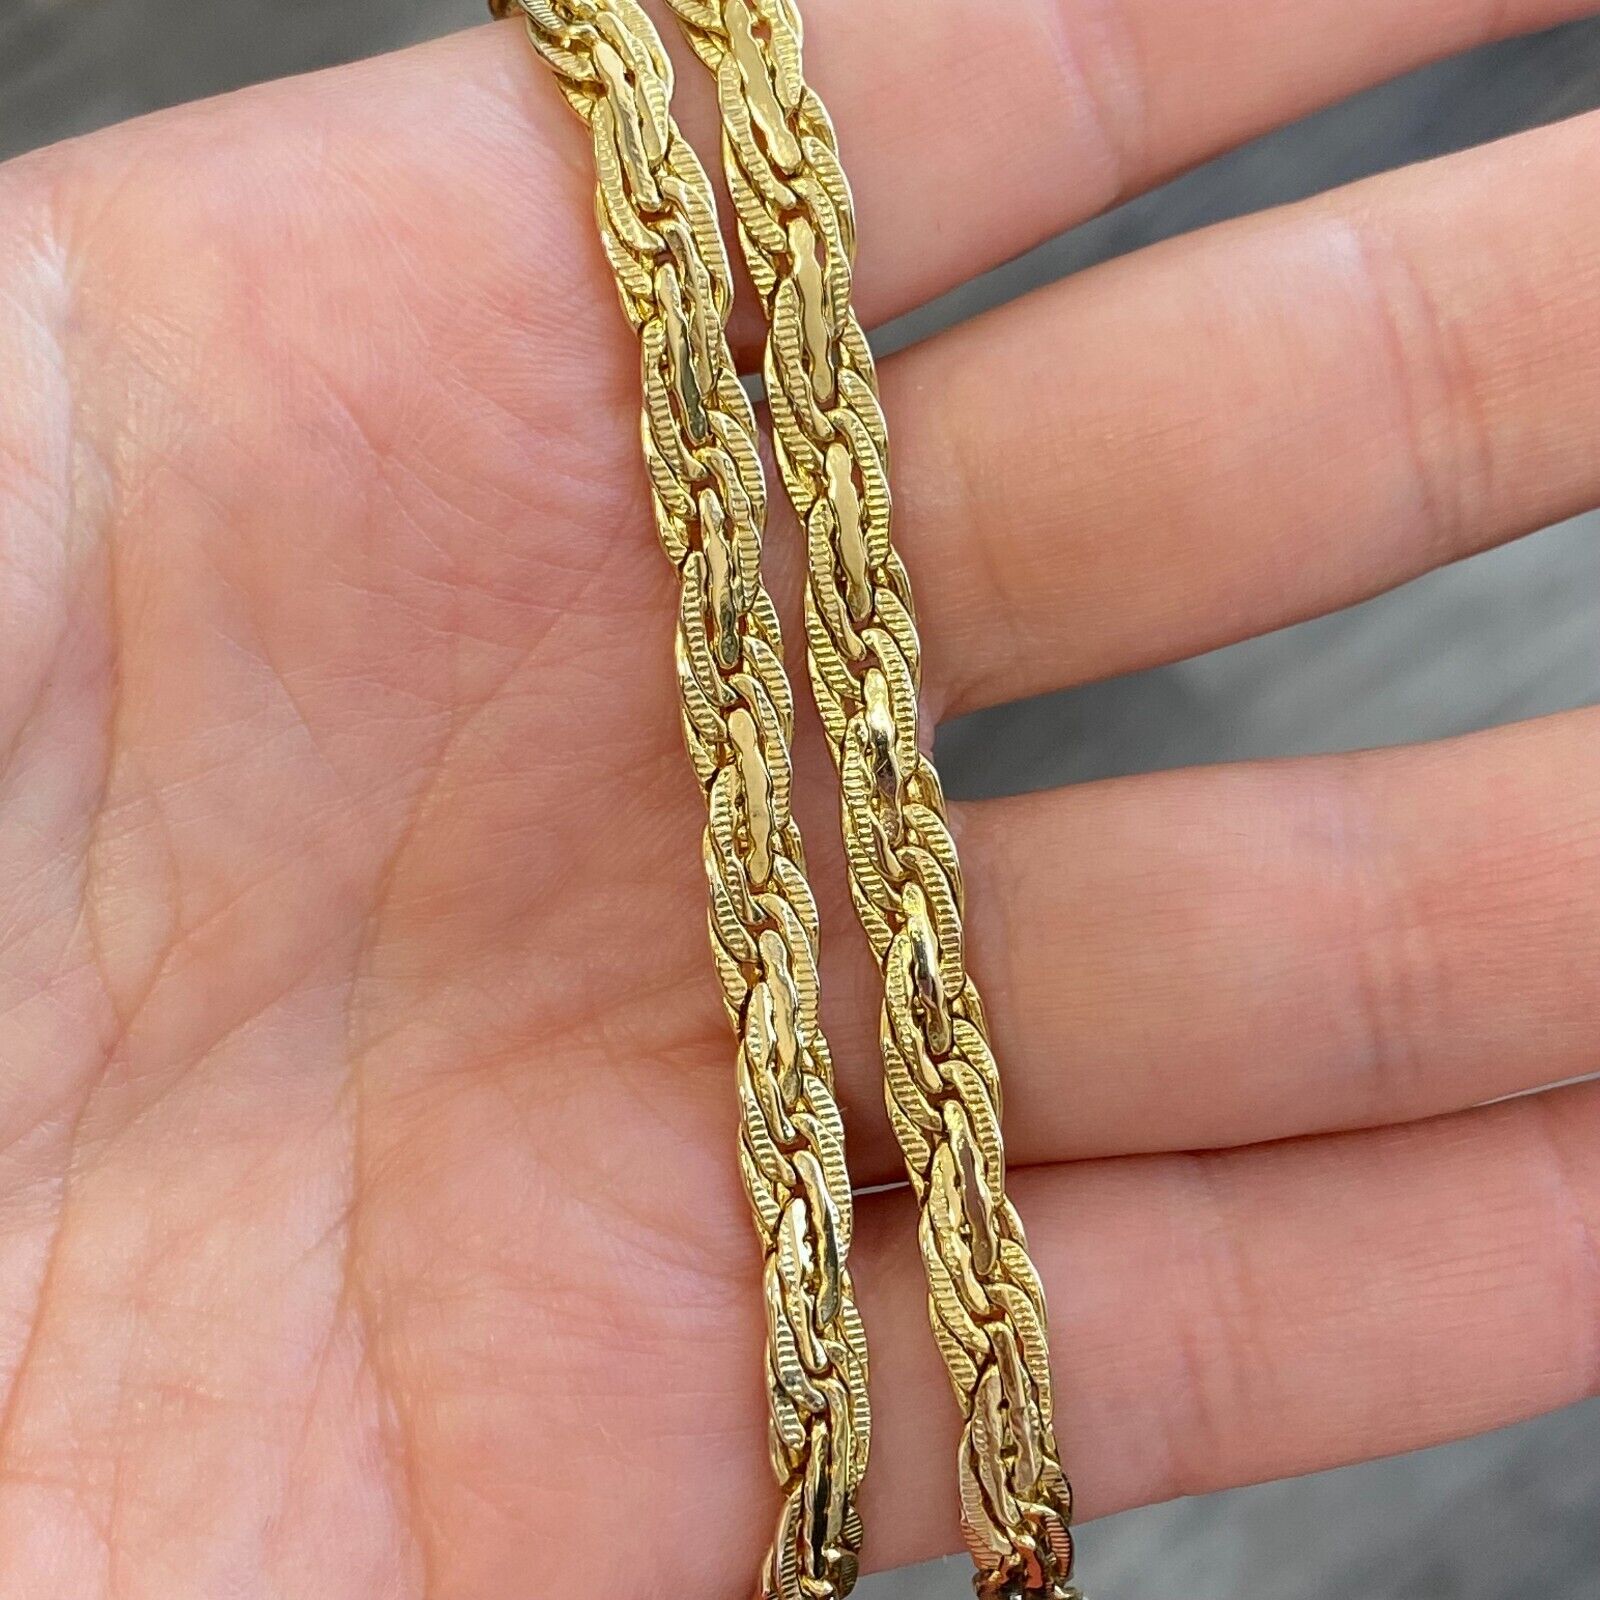 Snake Wave Chain Necklace in 14k Yellow Gold 20 Inch